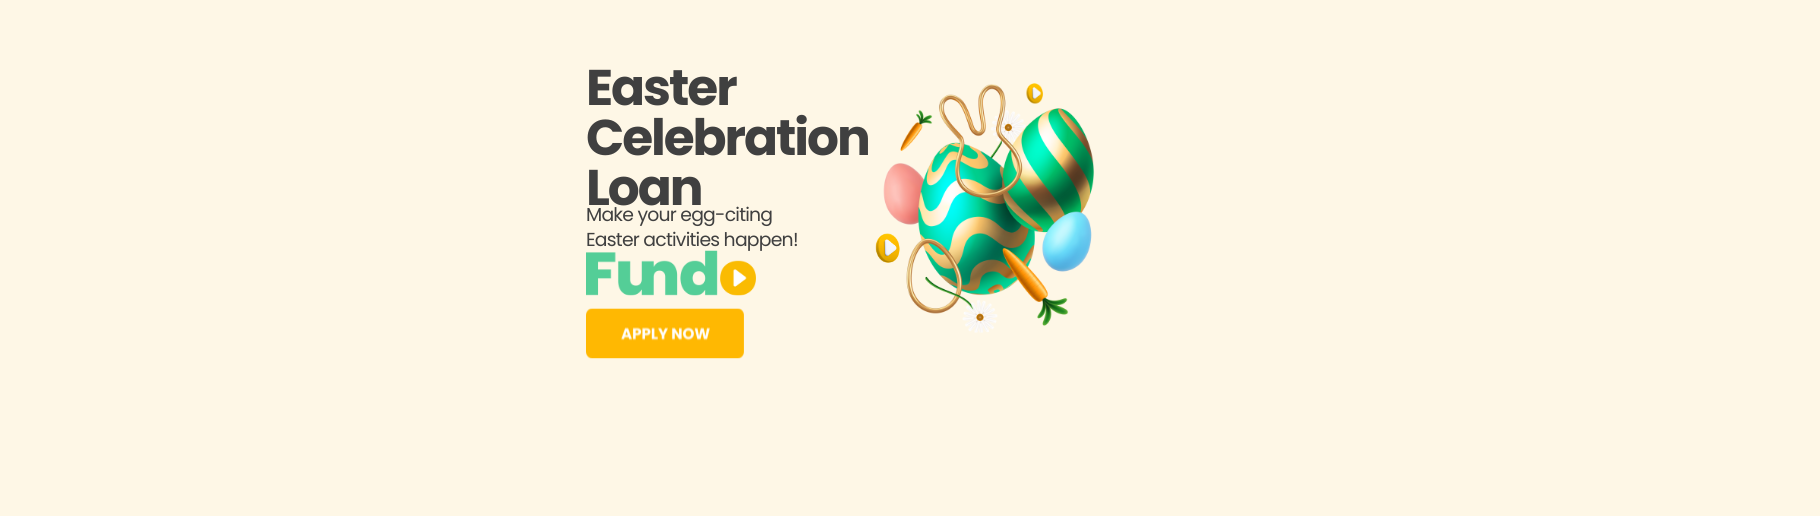 Same Day Cash Loan for Easter Activities